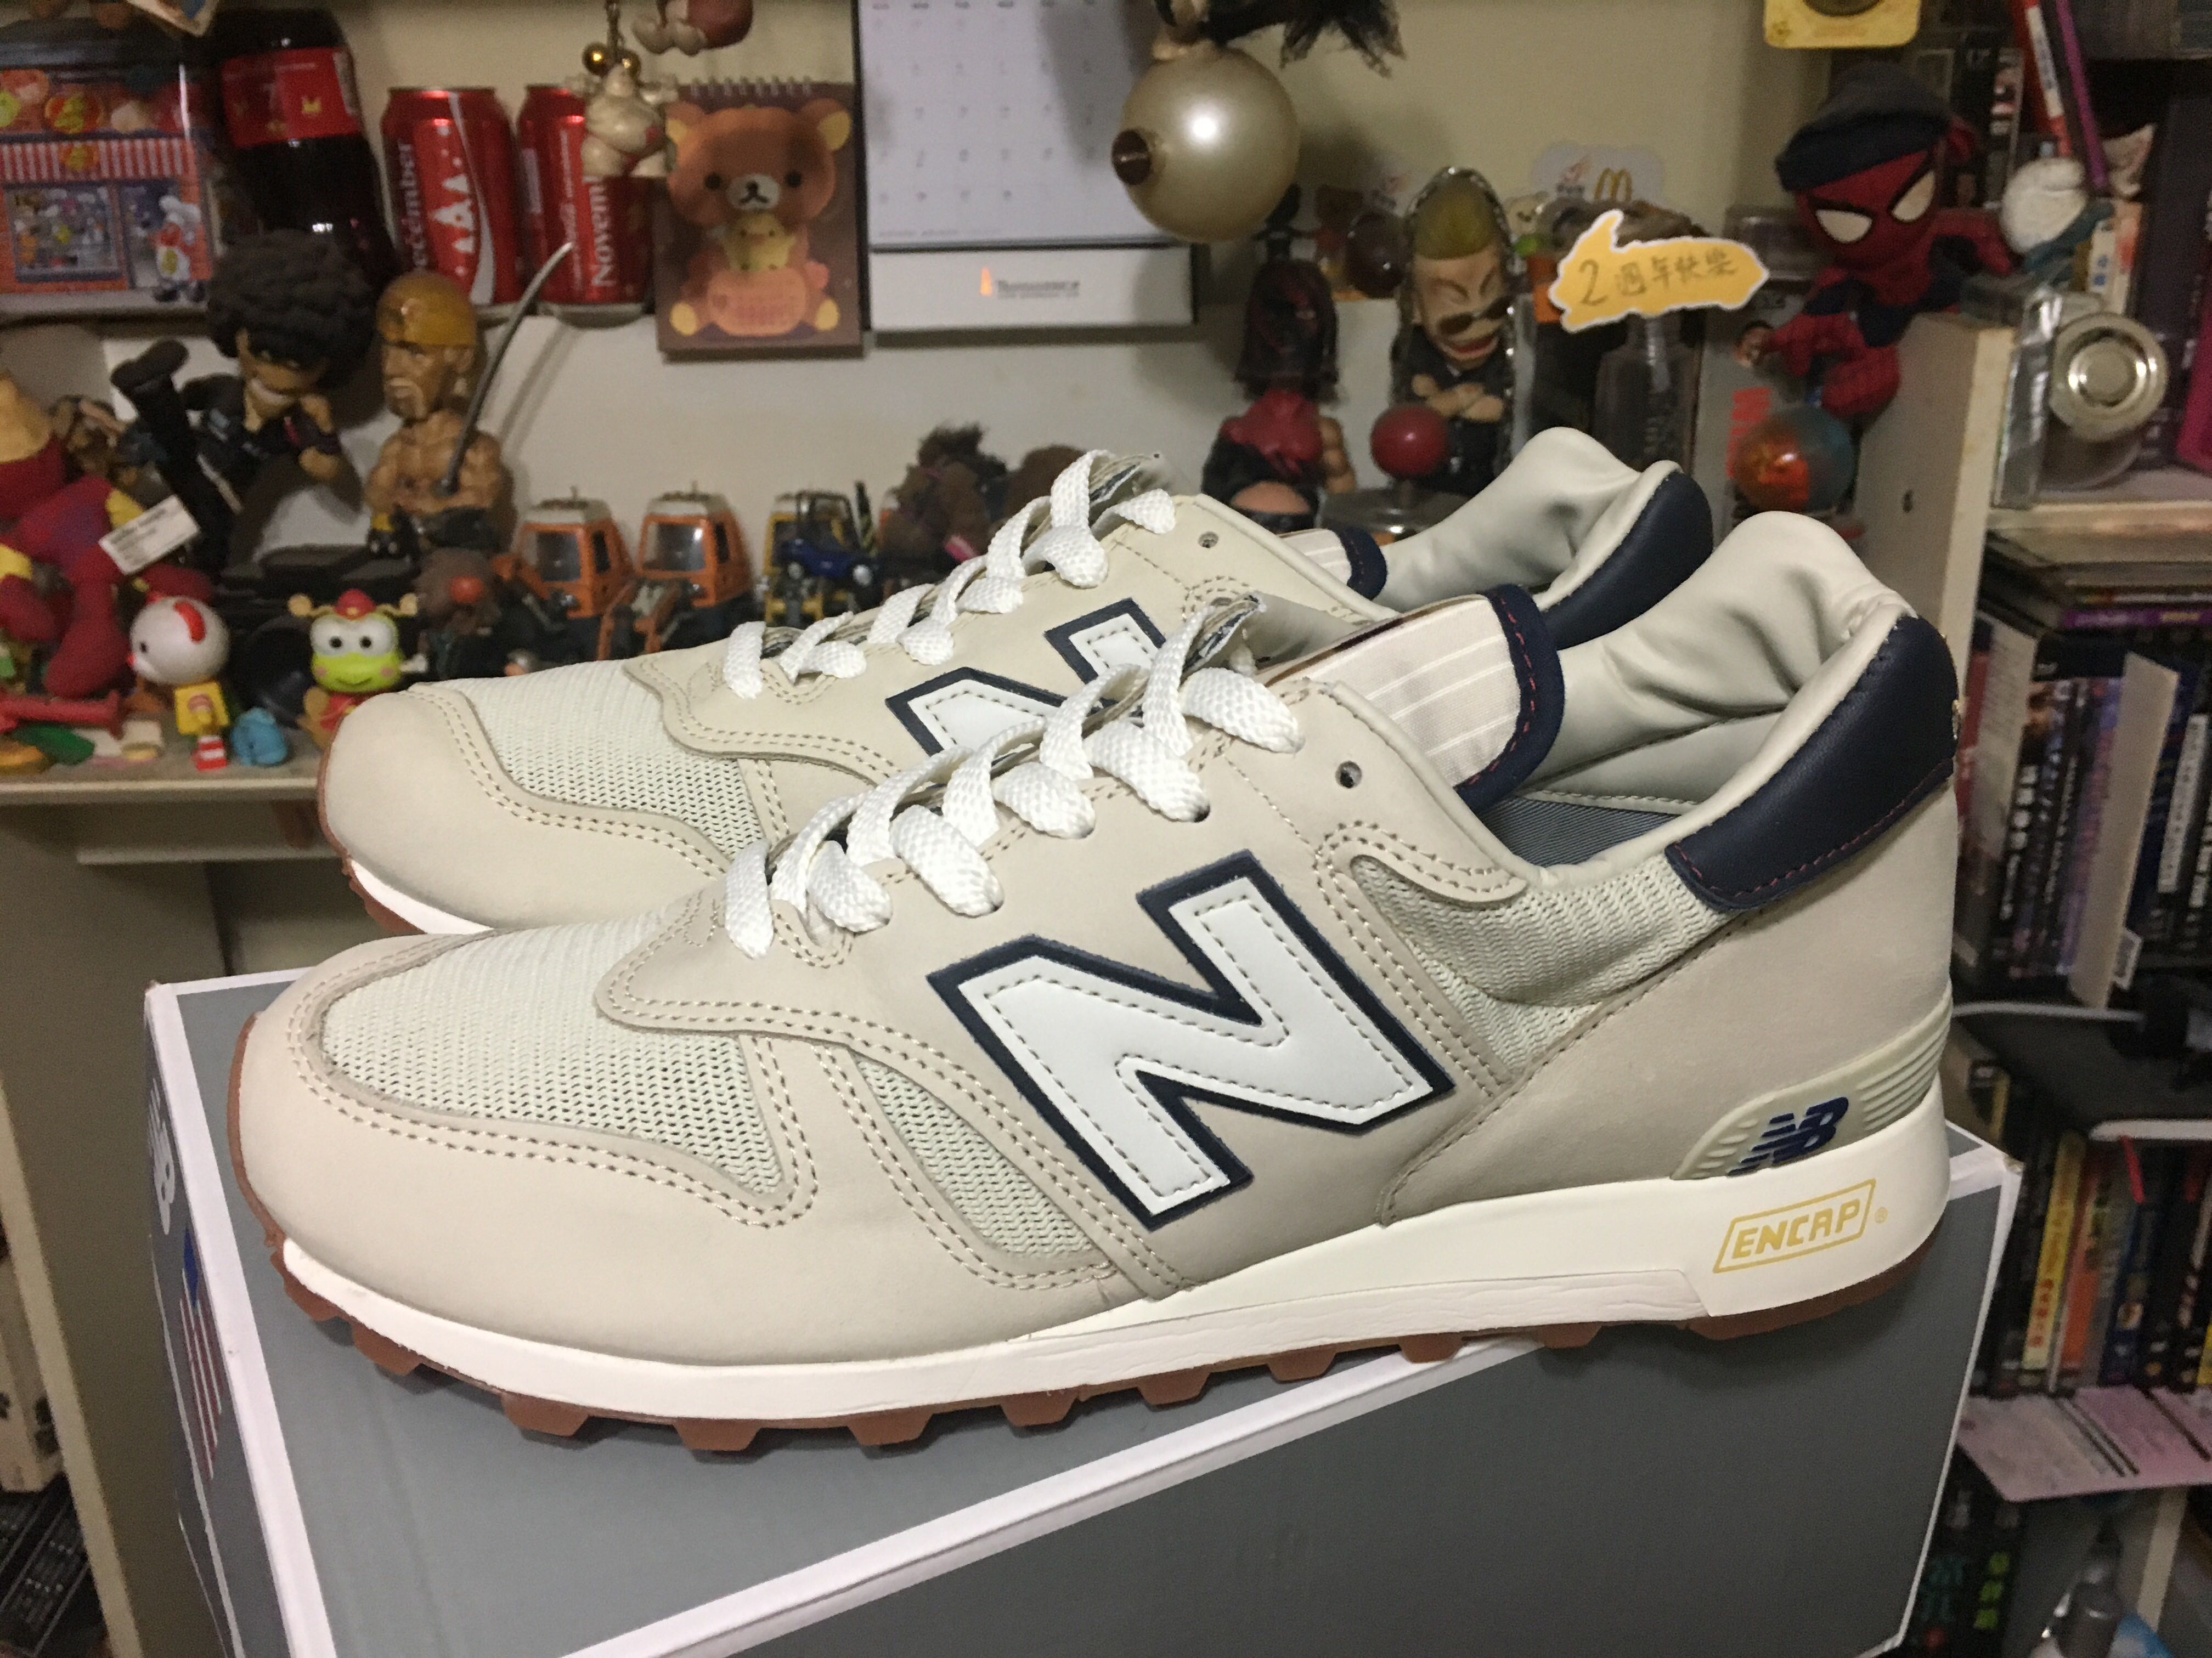 difference between new balance 1300 and 1400